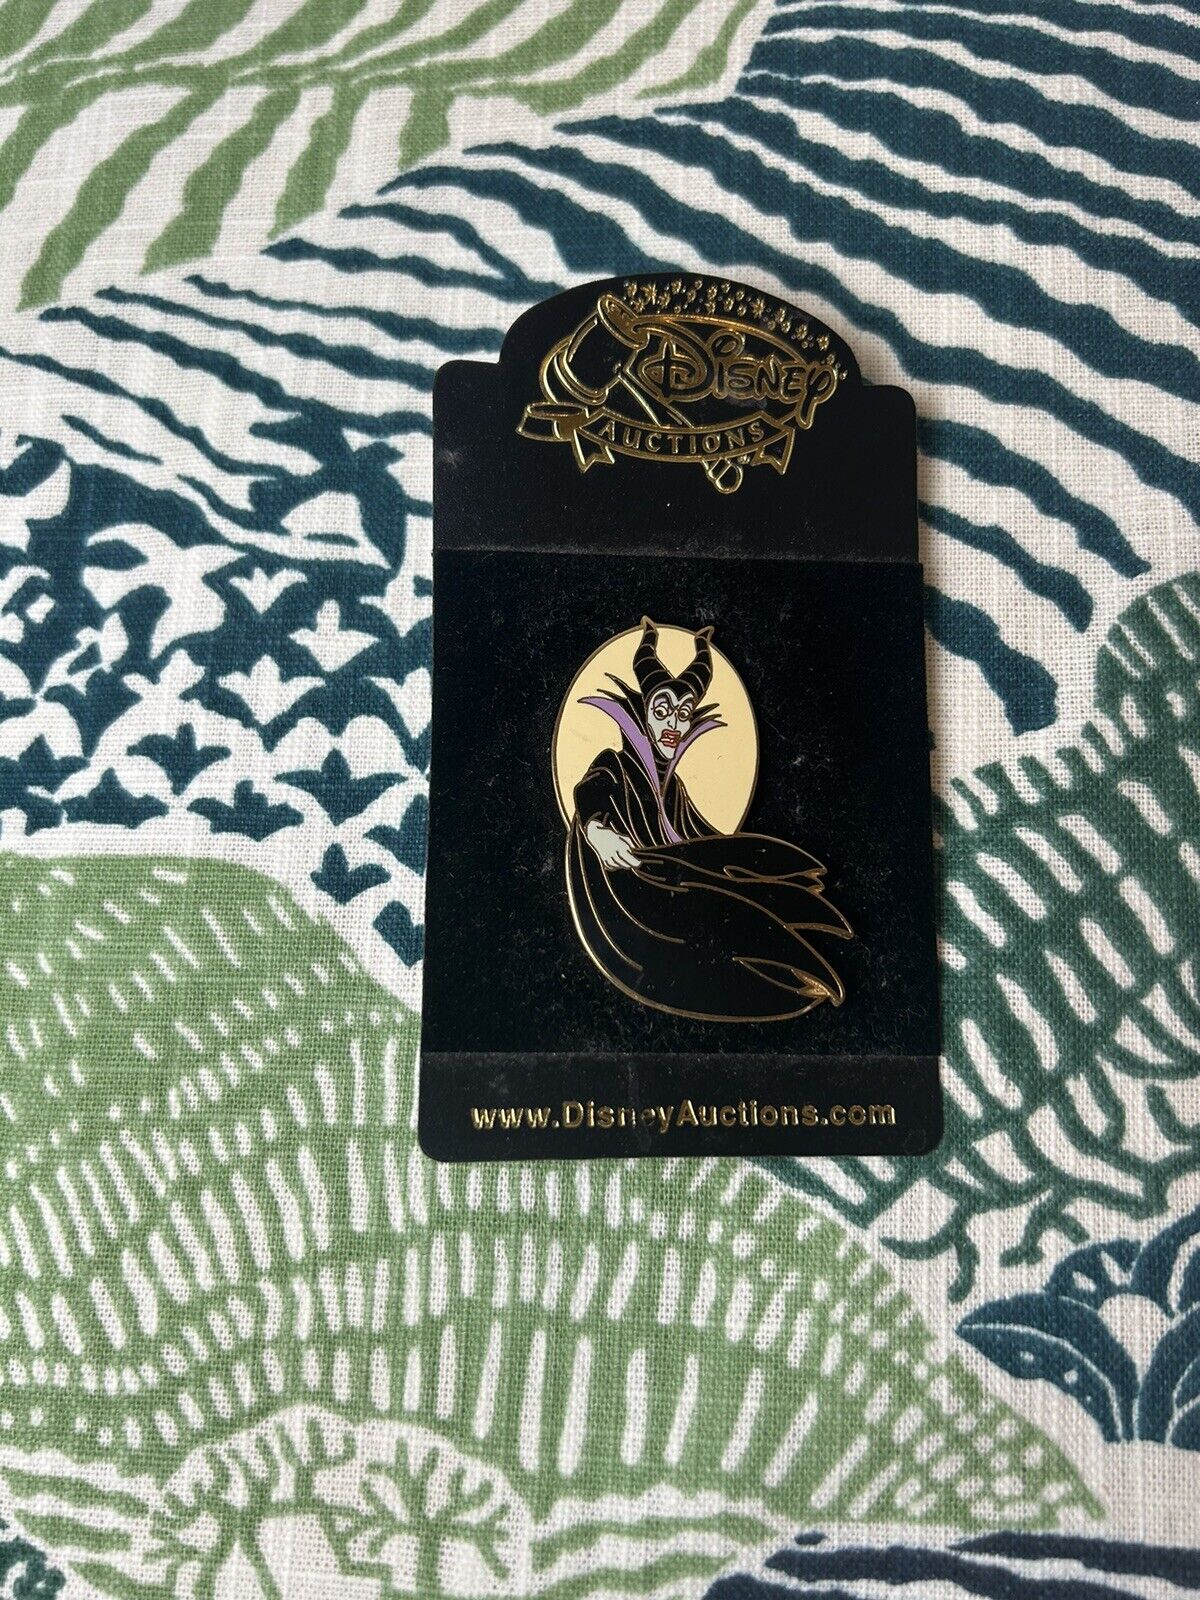 Pin 27730 Disney Auctions (P.I.N.S.) - Maleficent in Cape LE 1000